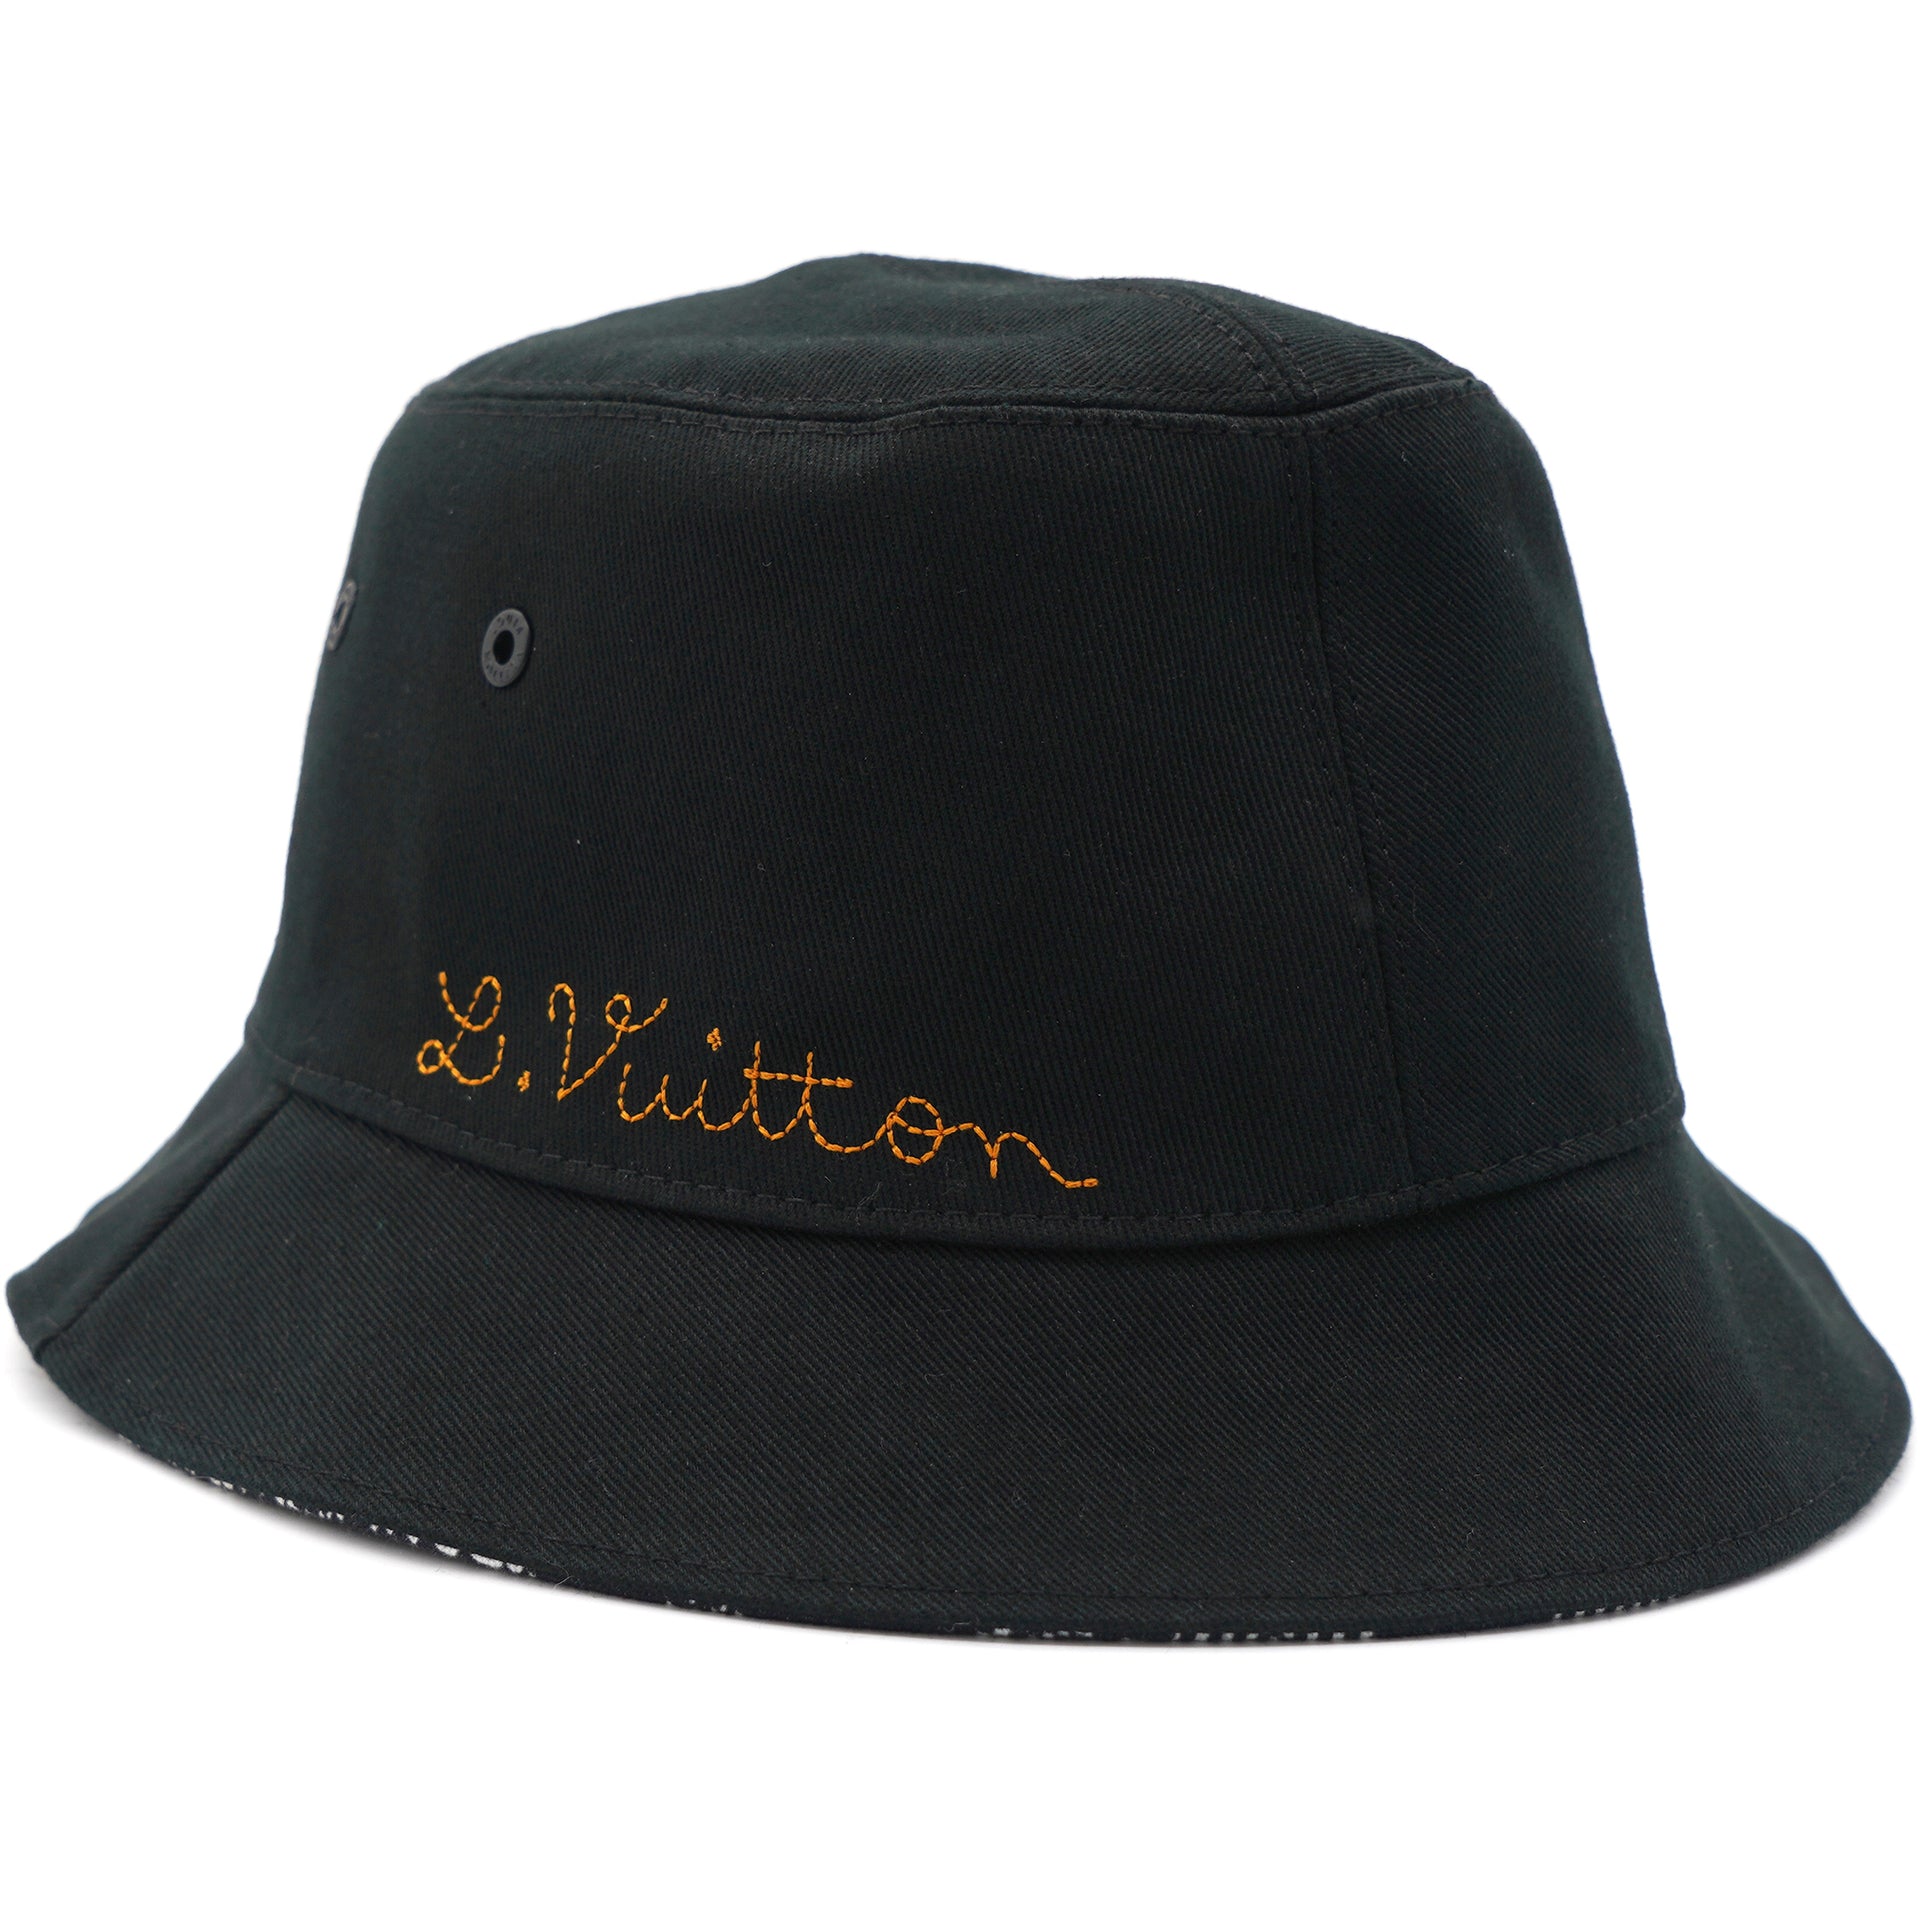 Authentic Louis Vuitton Black x White Distorted Damier Reversible Bucket Hat  – Italy Station